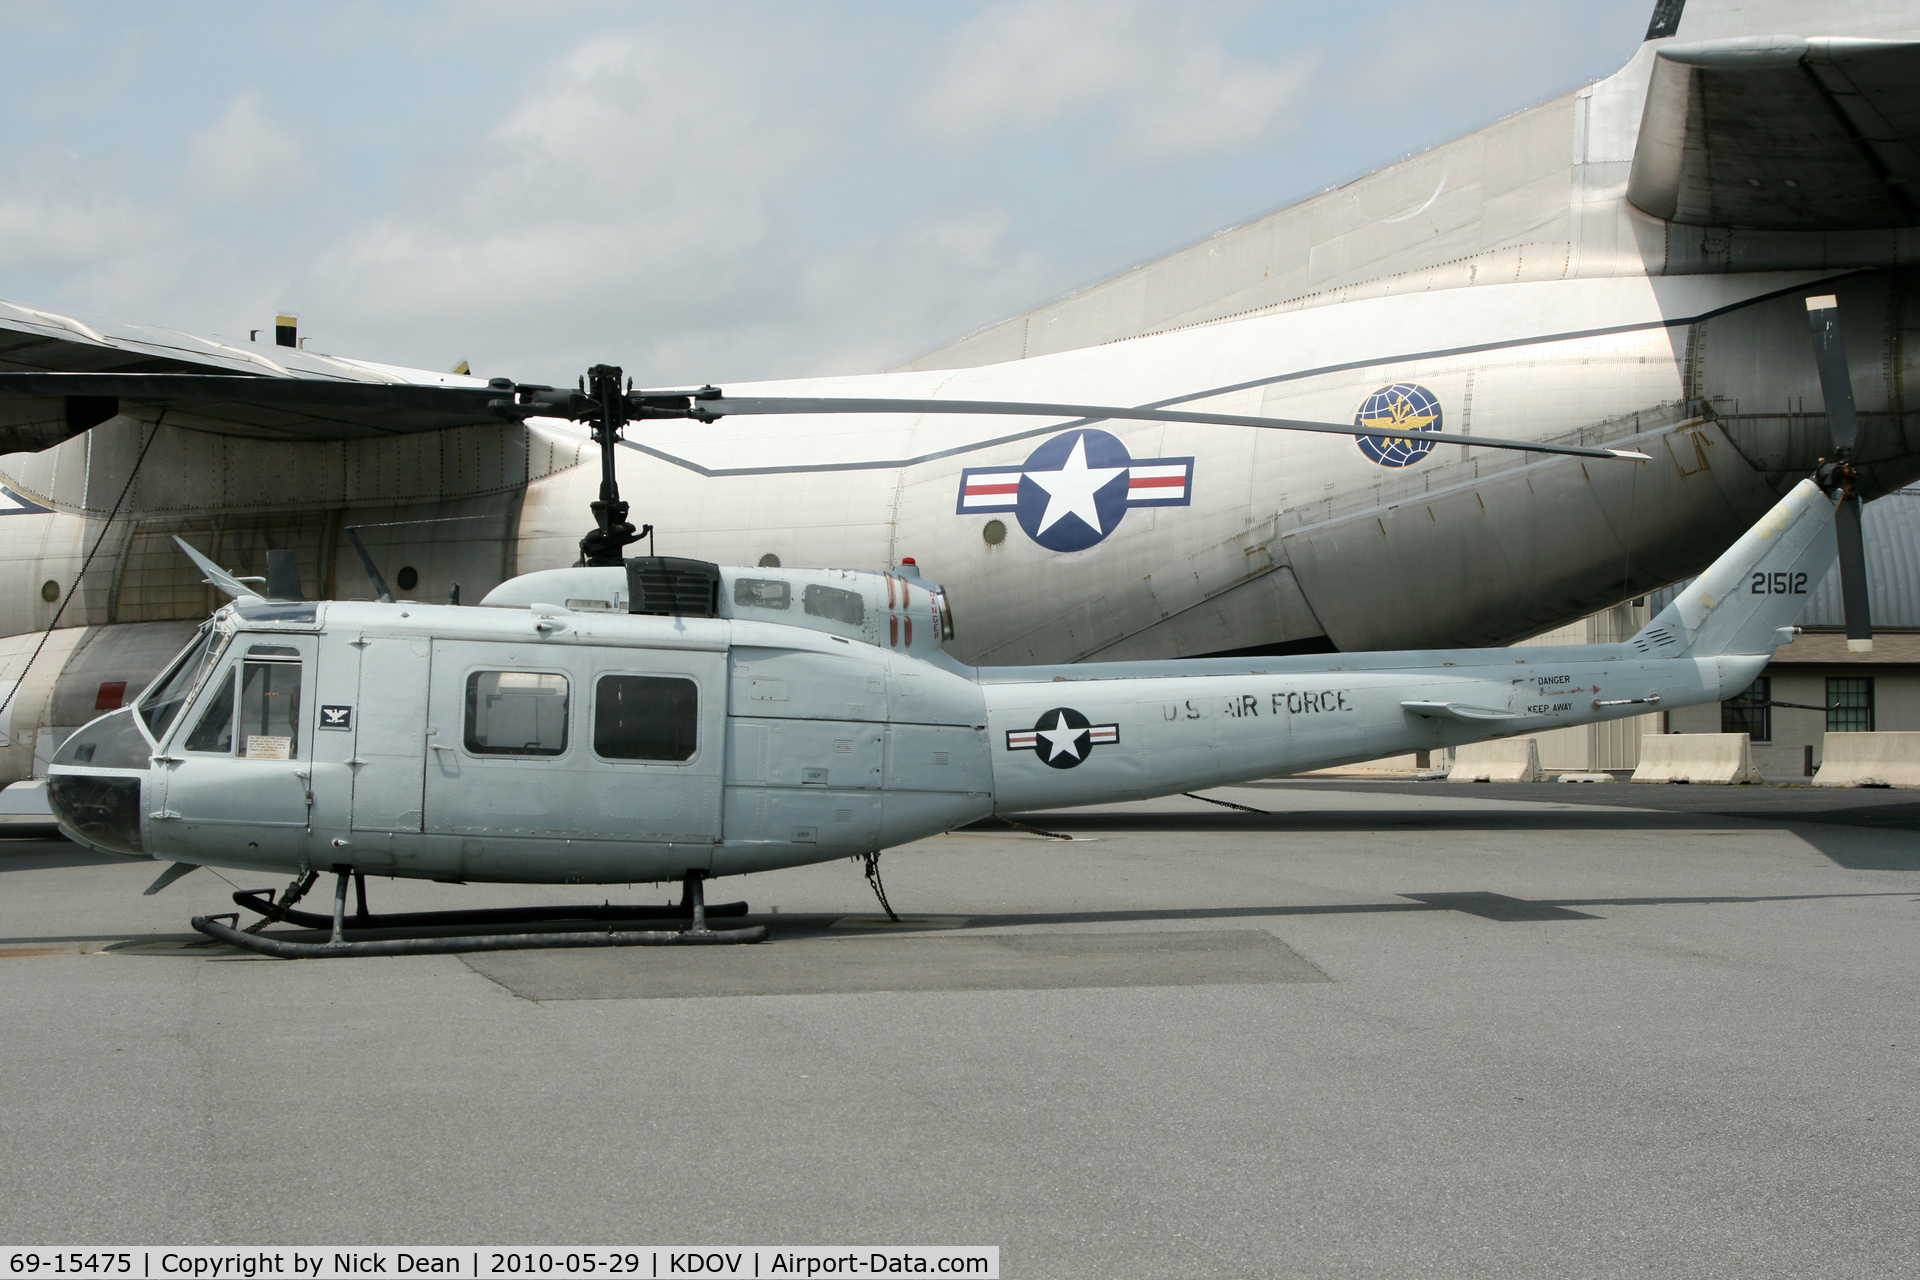 69-15475, 1969 Bell UH-1H Iroquois C/N 11763, KDOV displayed with fictitious 21512 as the s/n